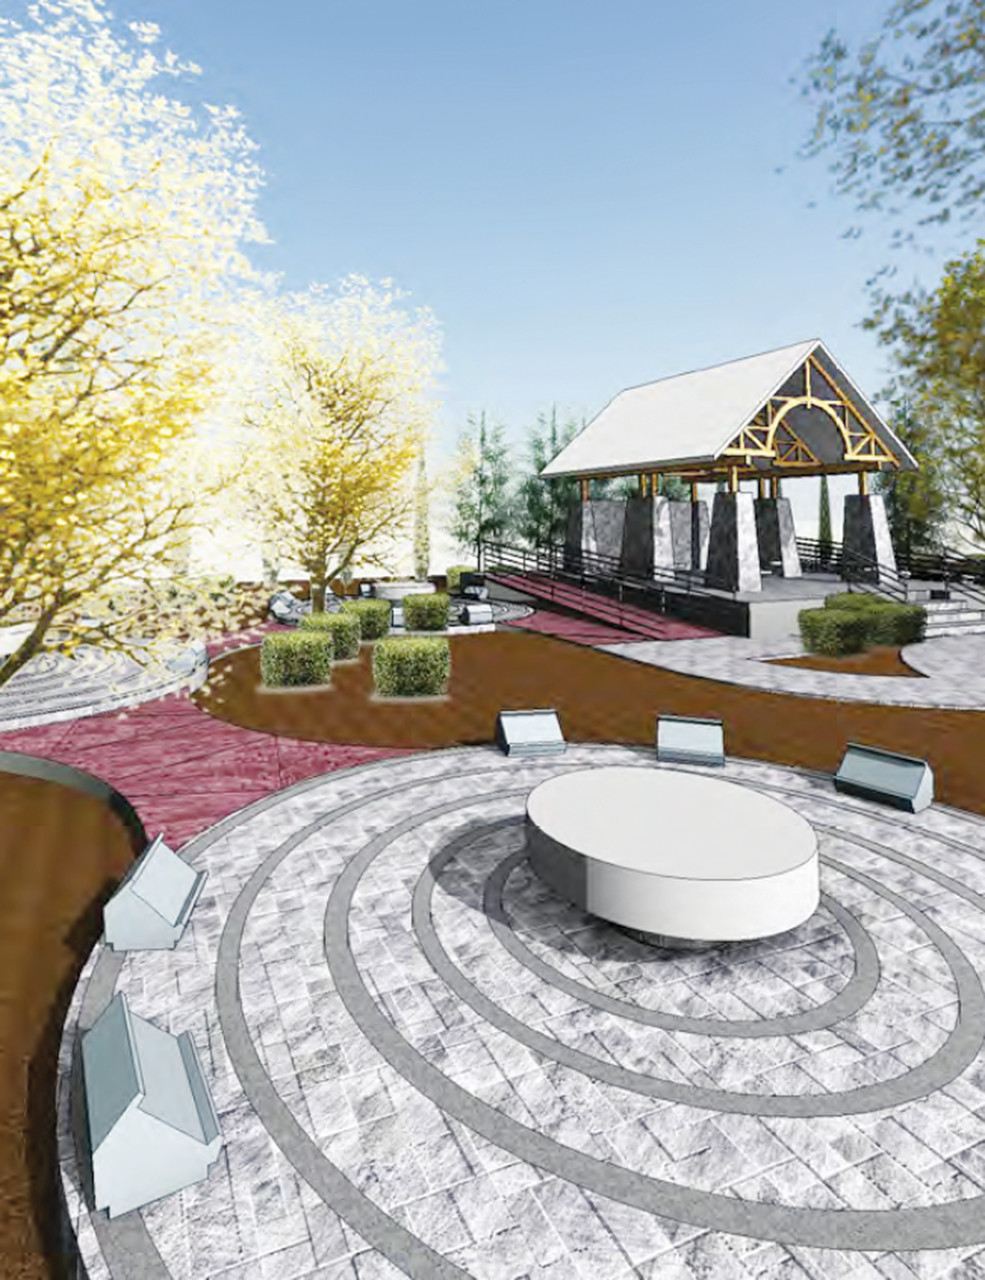 Memorial Gardens:  According to the Foundation’s website, individual memorials to the 100 victims will be nestled within these dozen circular areas divided between the Eastern and Western walkways bordering each side of the park. Centered within each garden will be a stone bench. The design allows those walking through the park to comfortably pass behind those visitors who wish to sit and reflect on a single memorial.